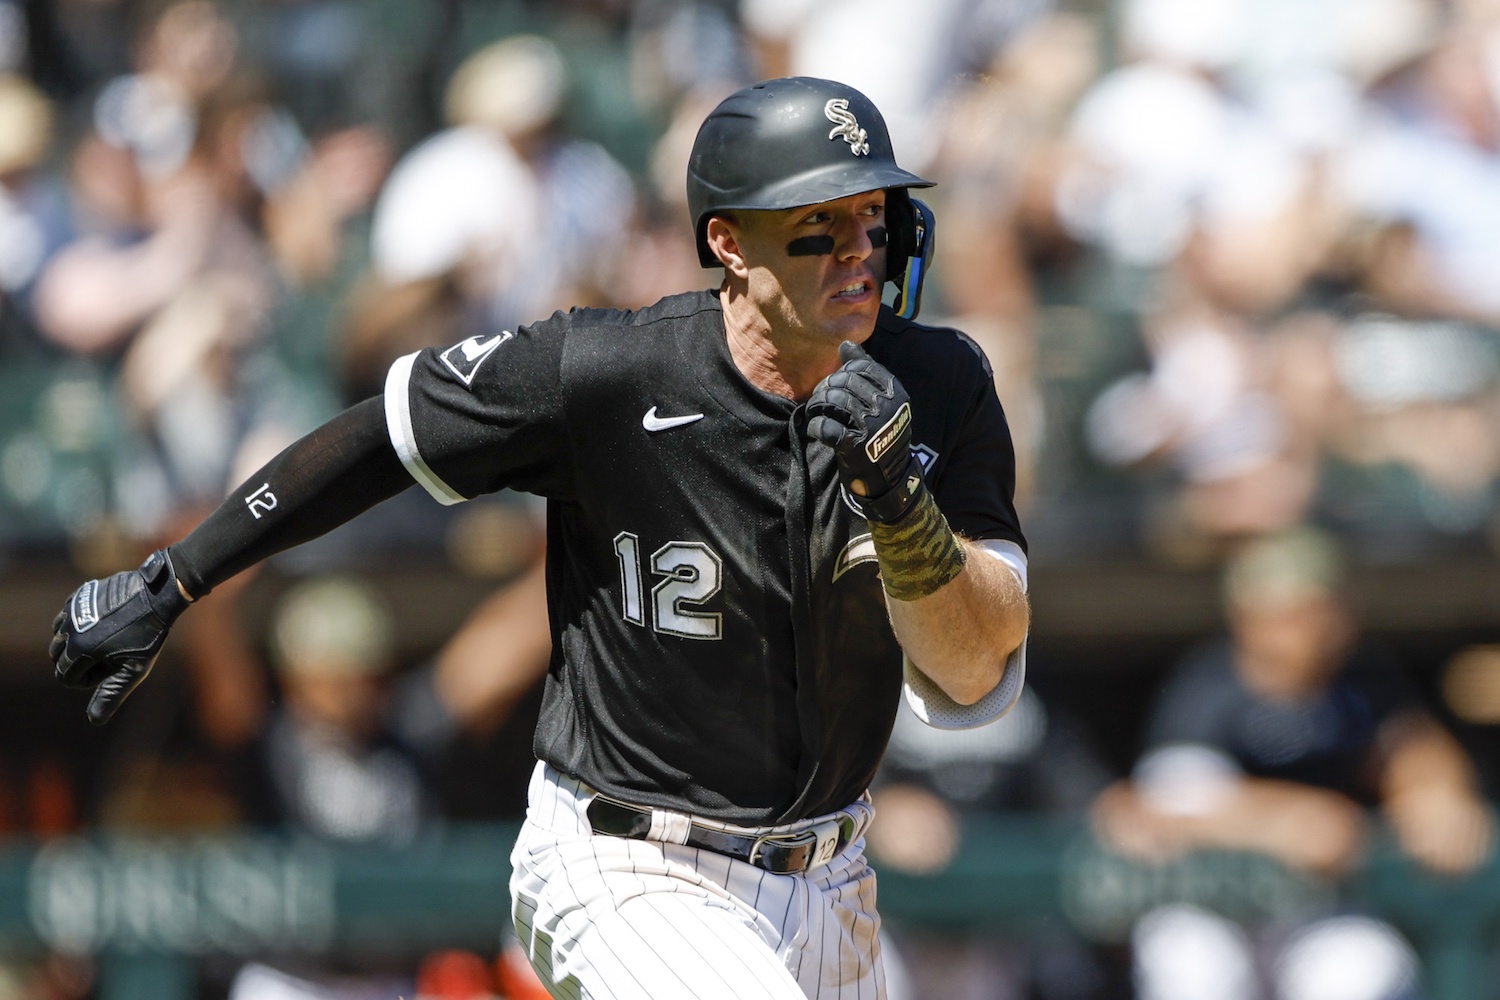 May 21, 2023; Chicago, Illinois, USA; Chicago White Sox right fielder Romy Gonzalez (12) runs after hitting a two-run triple against the Kansas City Royals during the fifth inning at Guaranteed Rate Field. Mandatory Credit: Kamil Krzaczynski-USA TODAY Sports